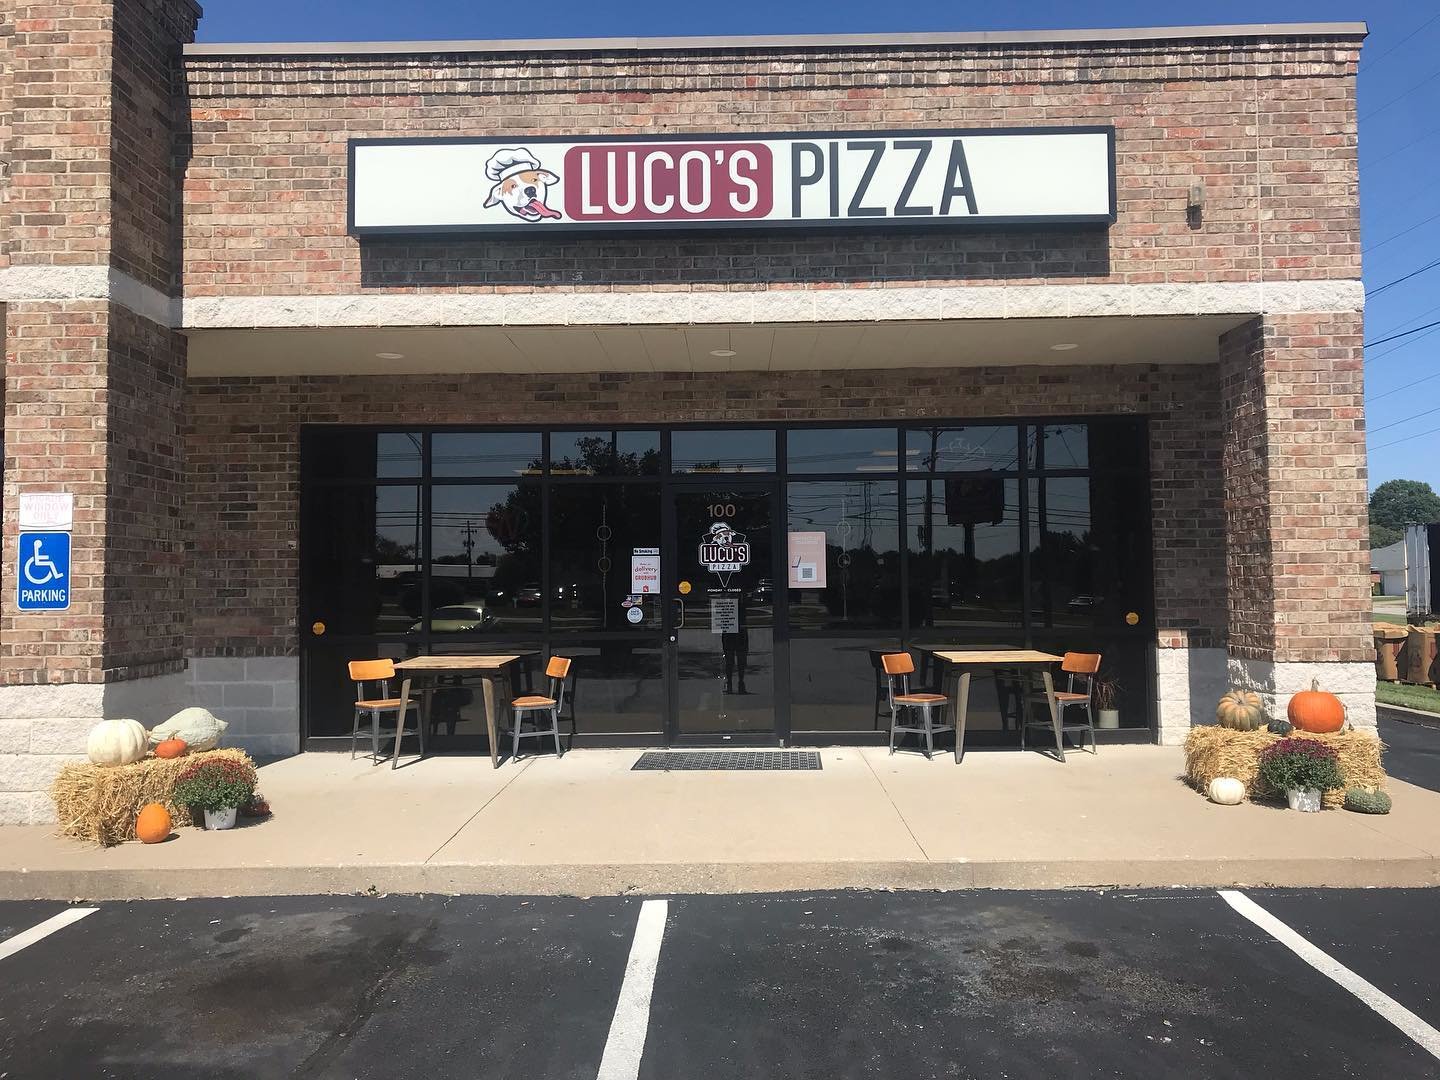 Luco's Pizza opened in 2018.